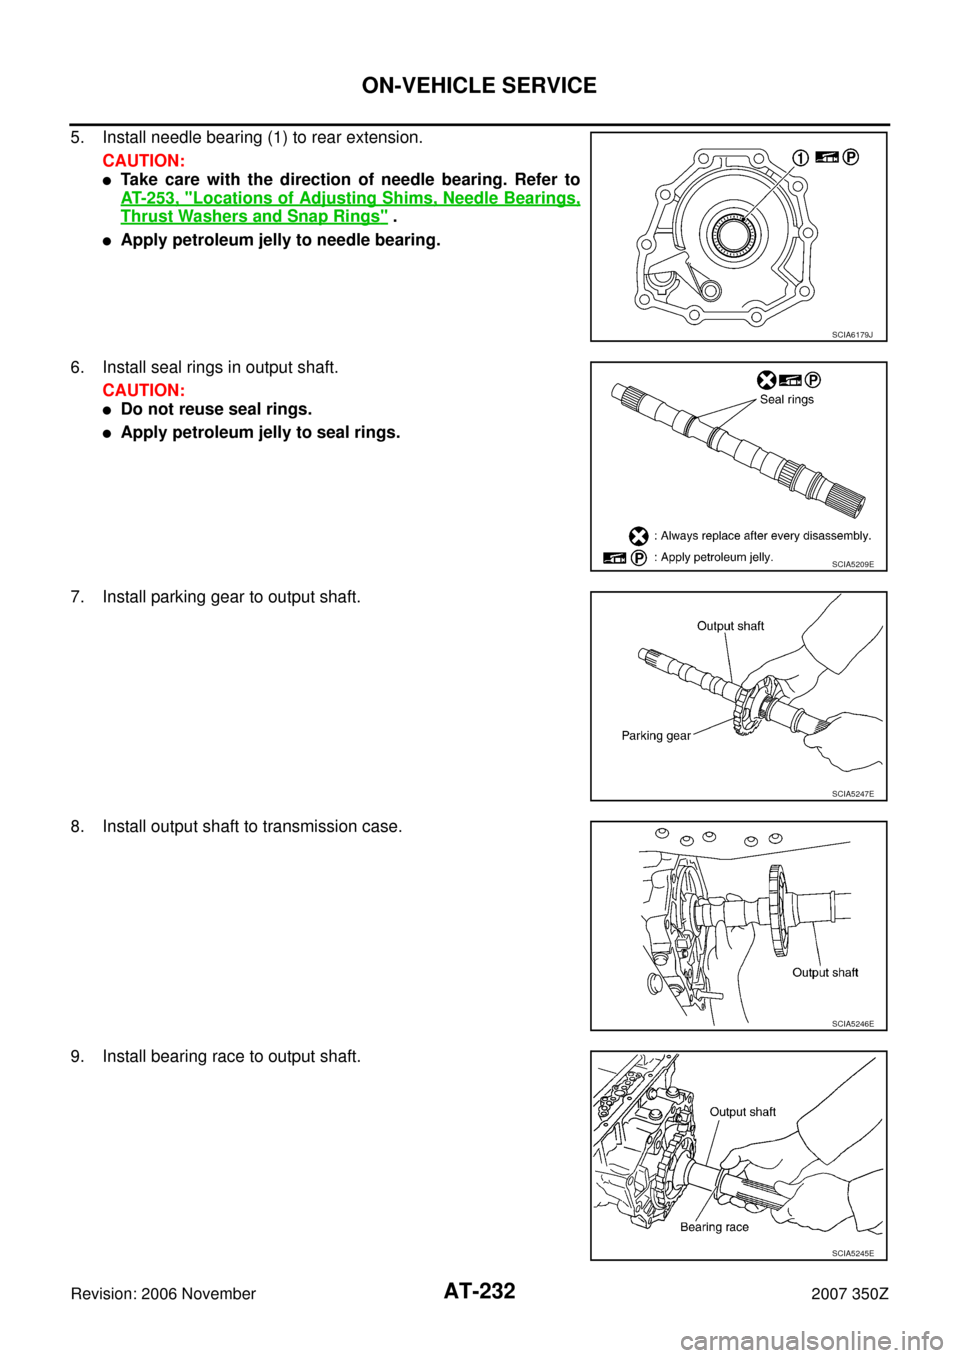 NISSAN 350Z 2007 Z33 Automatic Transmission Owners Guide AT-232
ON-VEHICLE SERVICE
Revision: 2006 November2007 350Z
5. Install needle bearing (1) to rear extension.
CAUTION:
Take care with the direction of needle bearing. Refer to
AT- 2 5 3 ,  "
Locations 